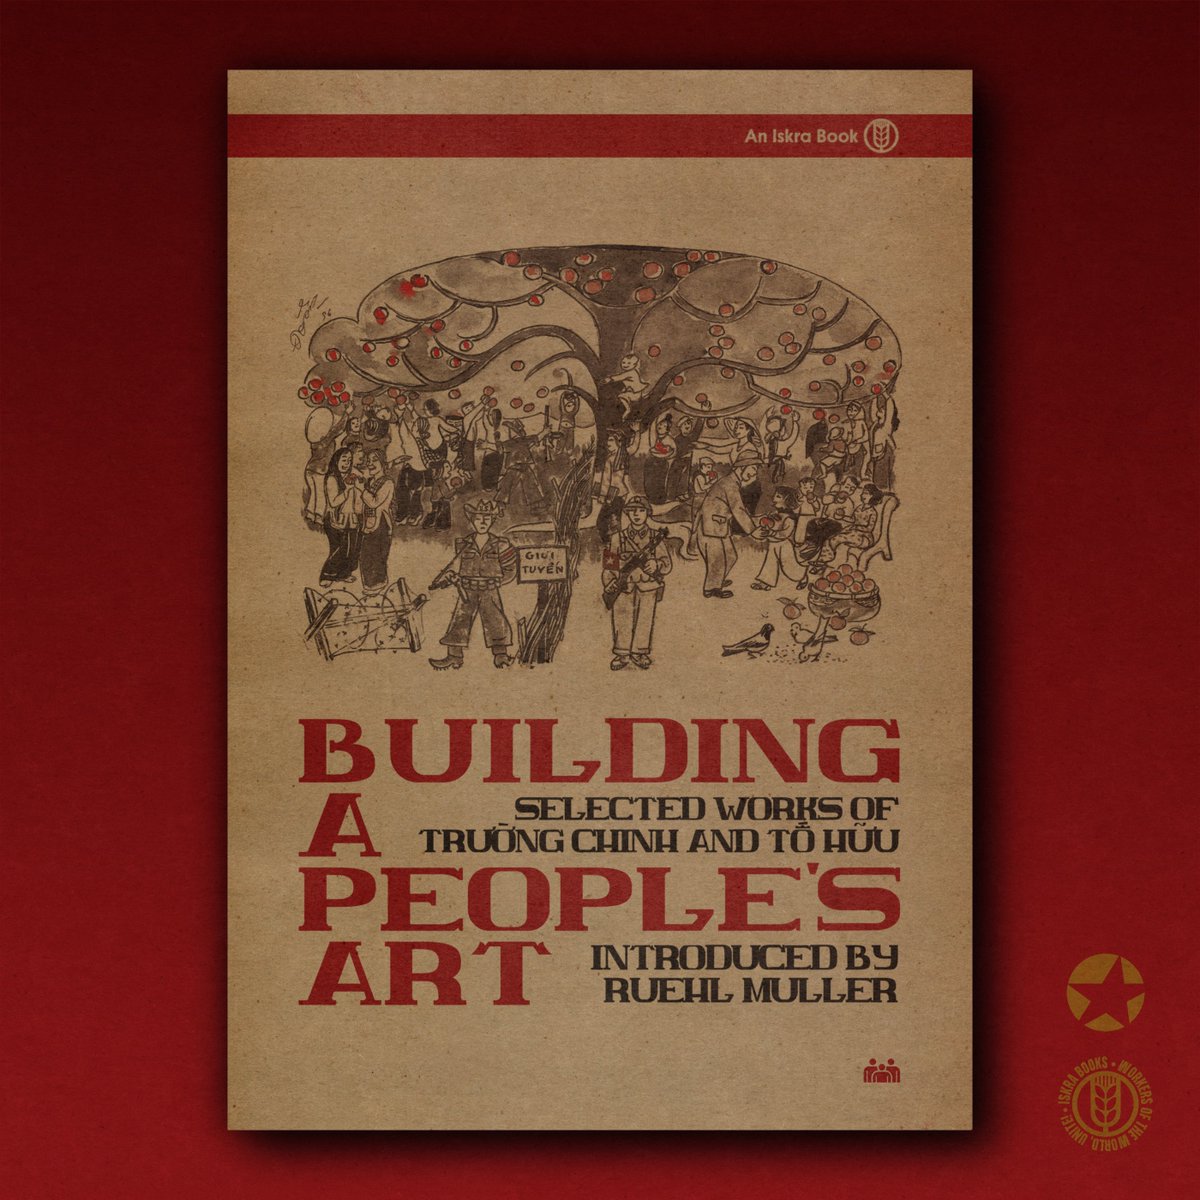 🇻🇳 In light of the Điện Biên Phủ anniversary, we are thrilled to announce the forthcoming 2024 release of Building a People's Art—a first-ever collection of texts from two of Vietnam’s most impactful wartime cultural theorists, Trường Chinh and Tố Hữu, ranging from scathing…